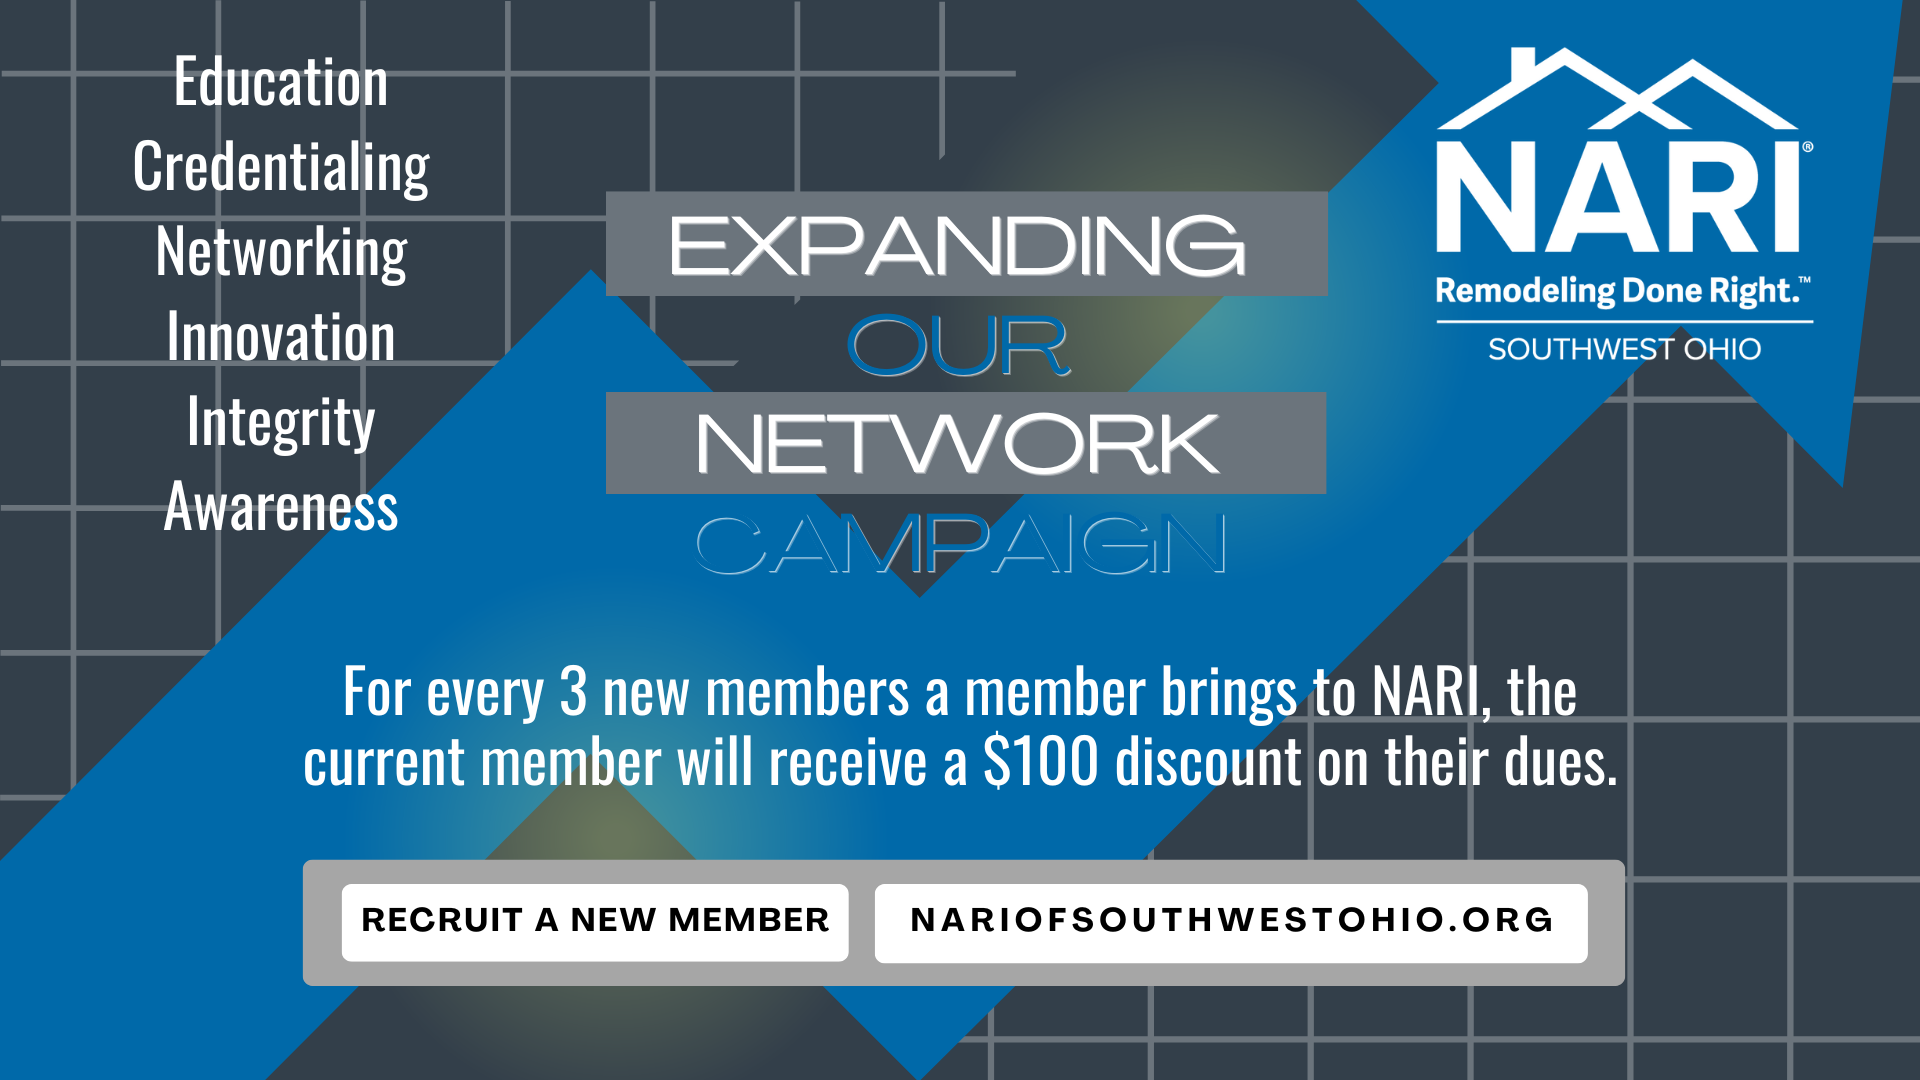 Expanding Our Network Campaign